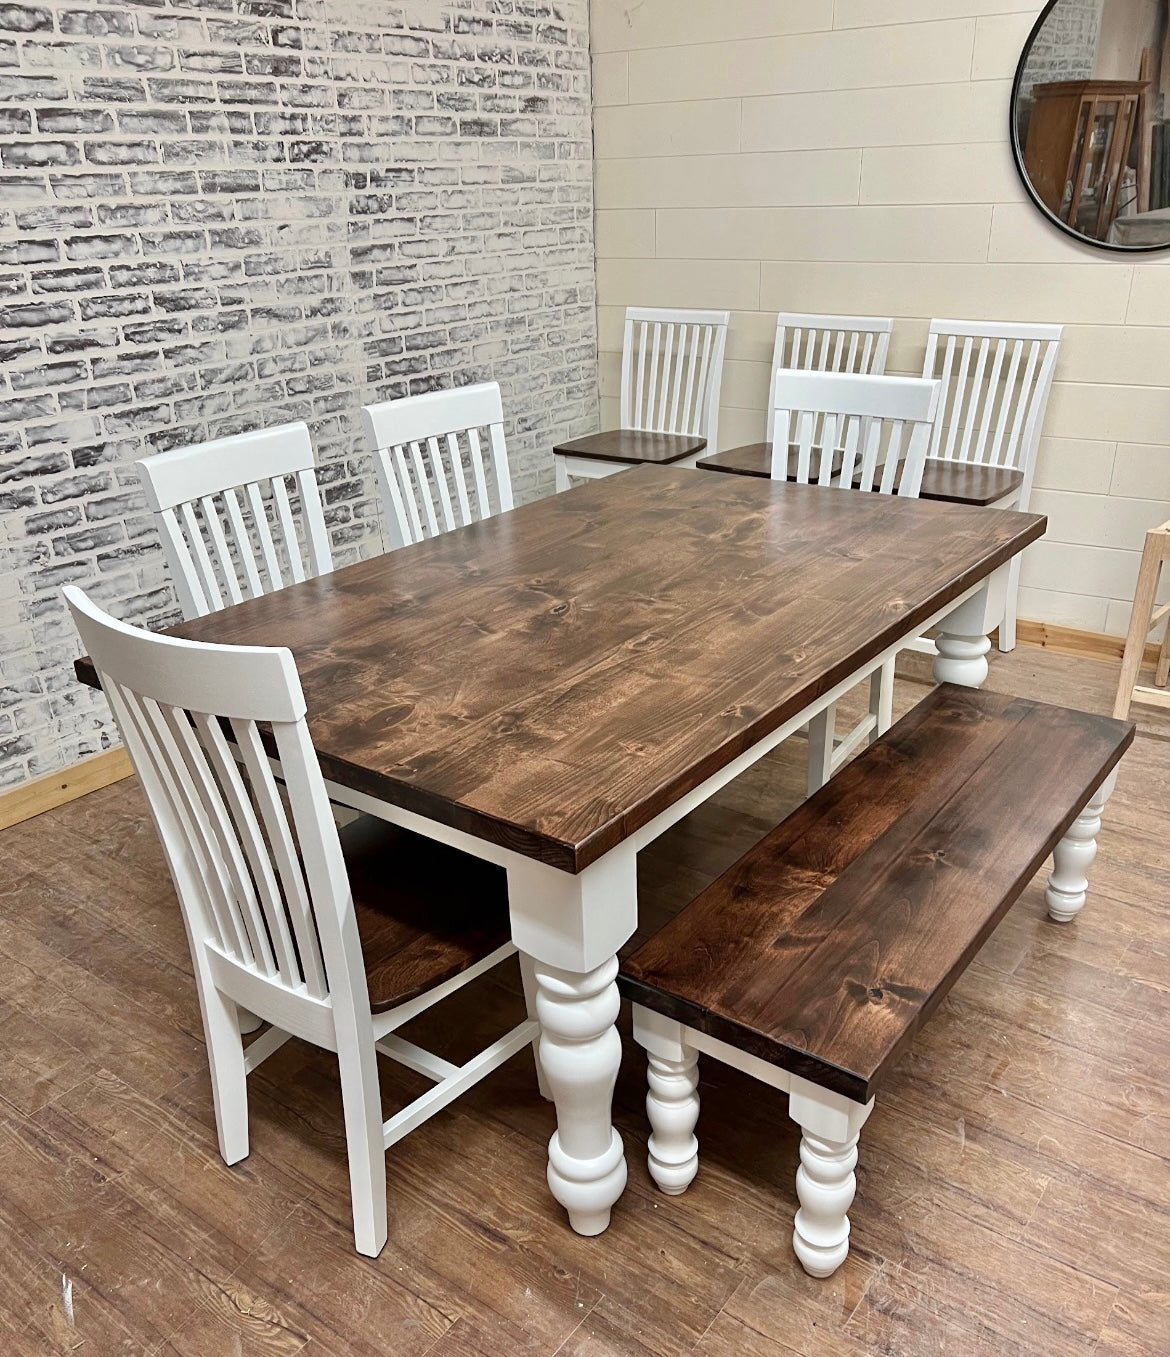 Pictured with a 5' L x 42" W Rustic Alder top with Espresso stain and a painted White base. Pictured with a Matching Bench and 4 Mission Dining Chairs. 